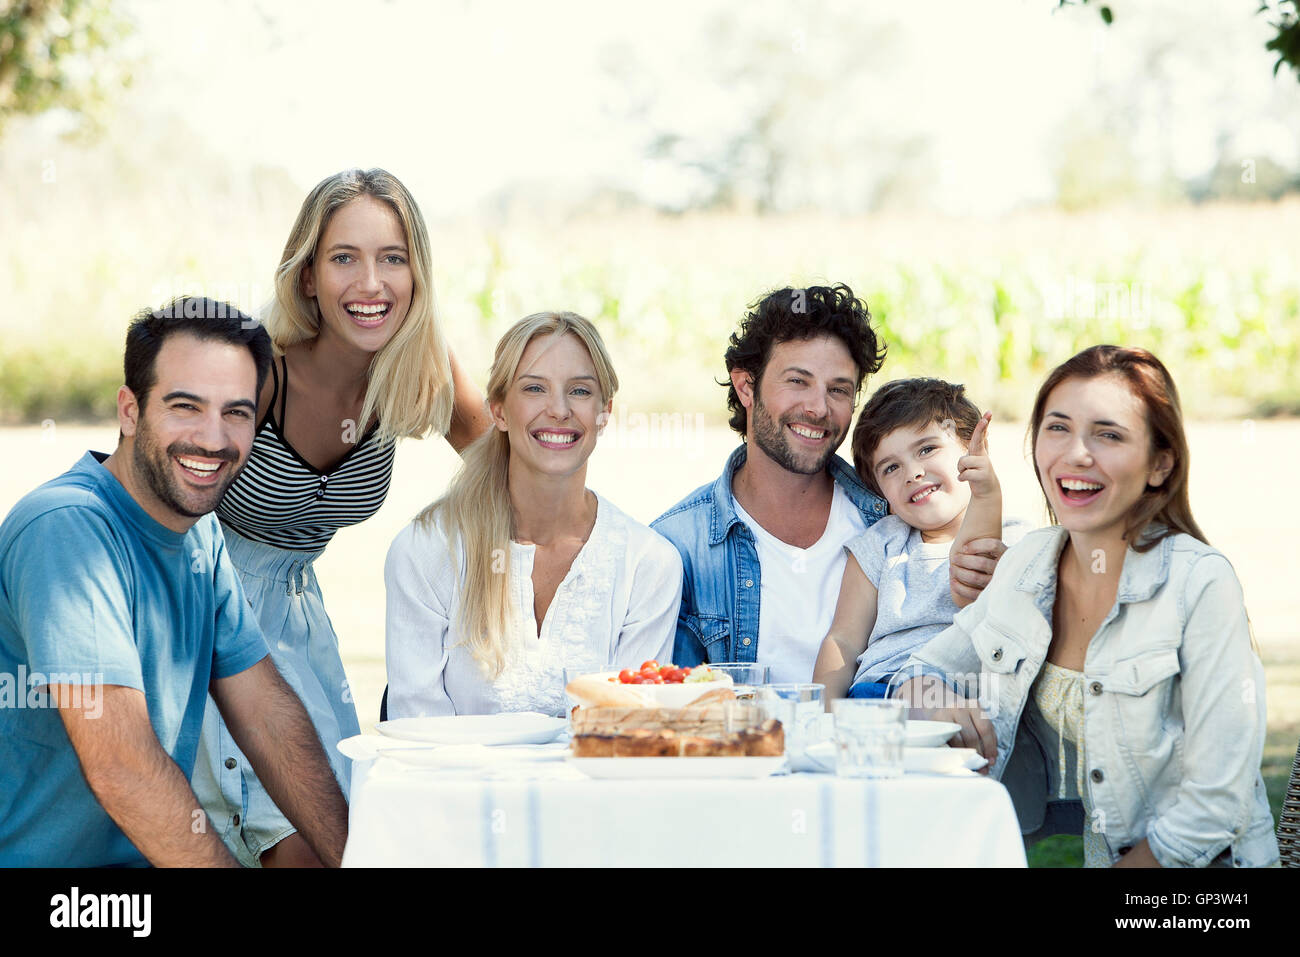 Family spending time together outdoors, group portrait Stock Photo